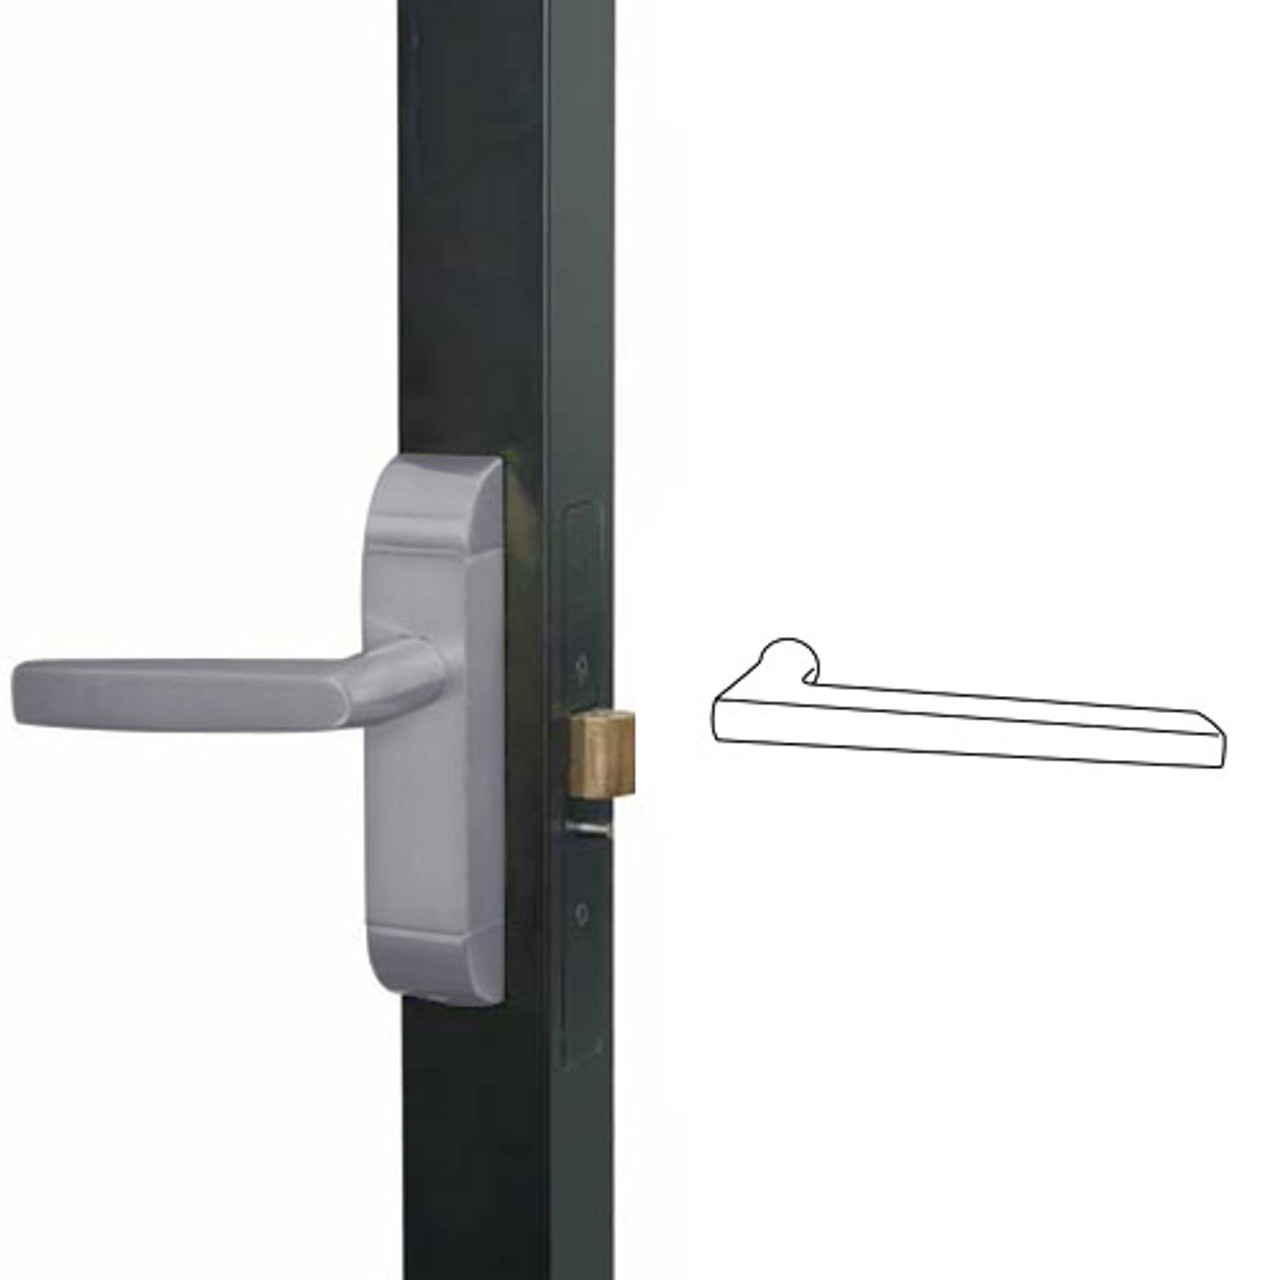 4600M-MD-541-US32D Adams Rite MD Designer Deadlatch handle in Satin Stainless Finish